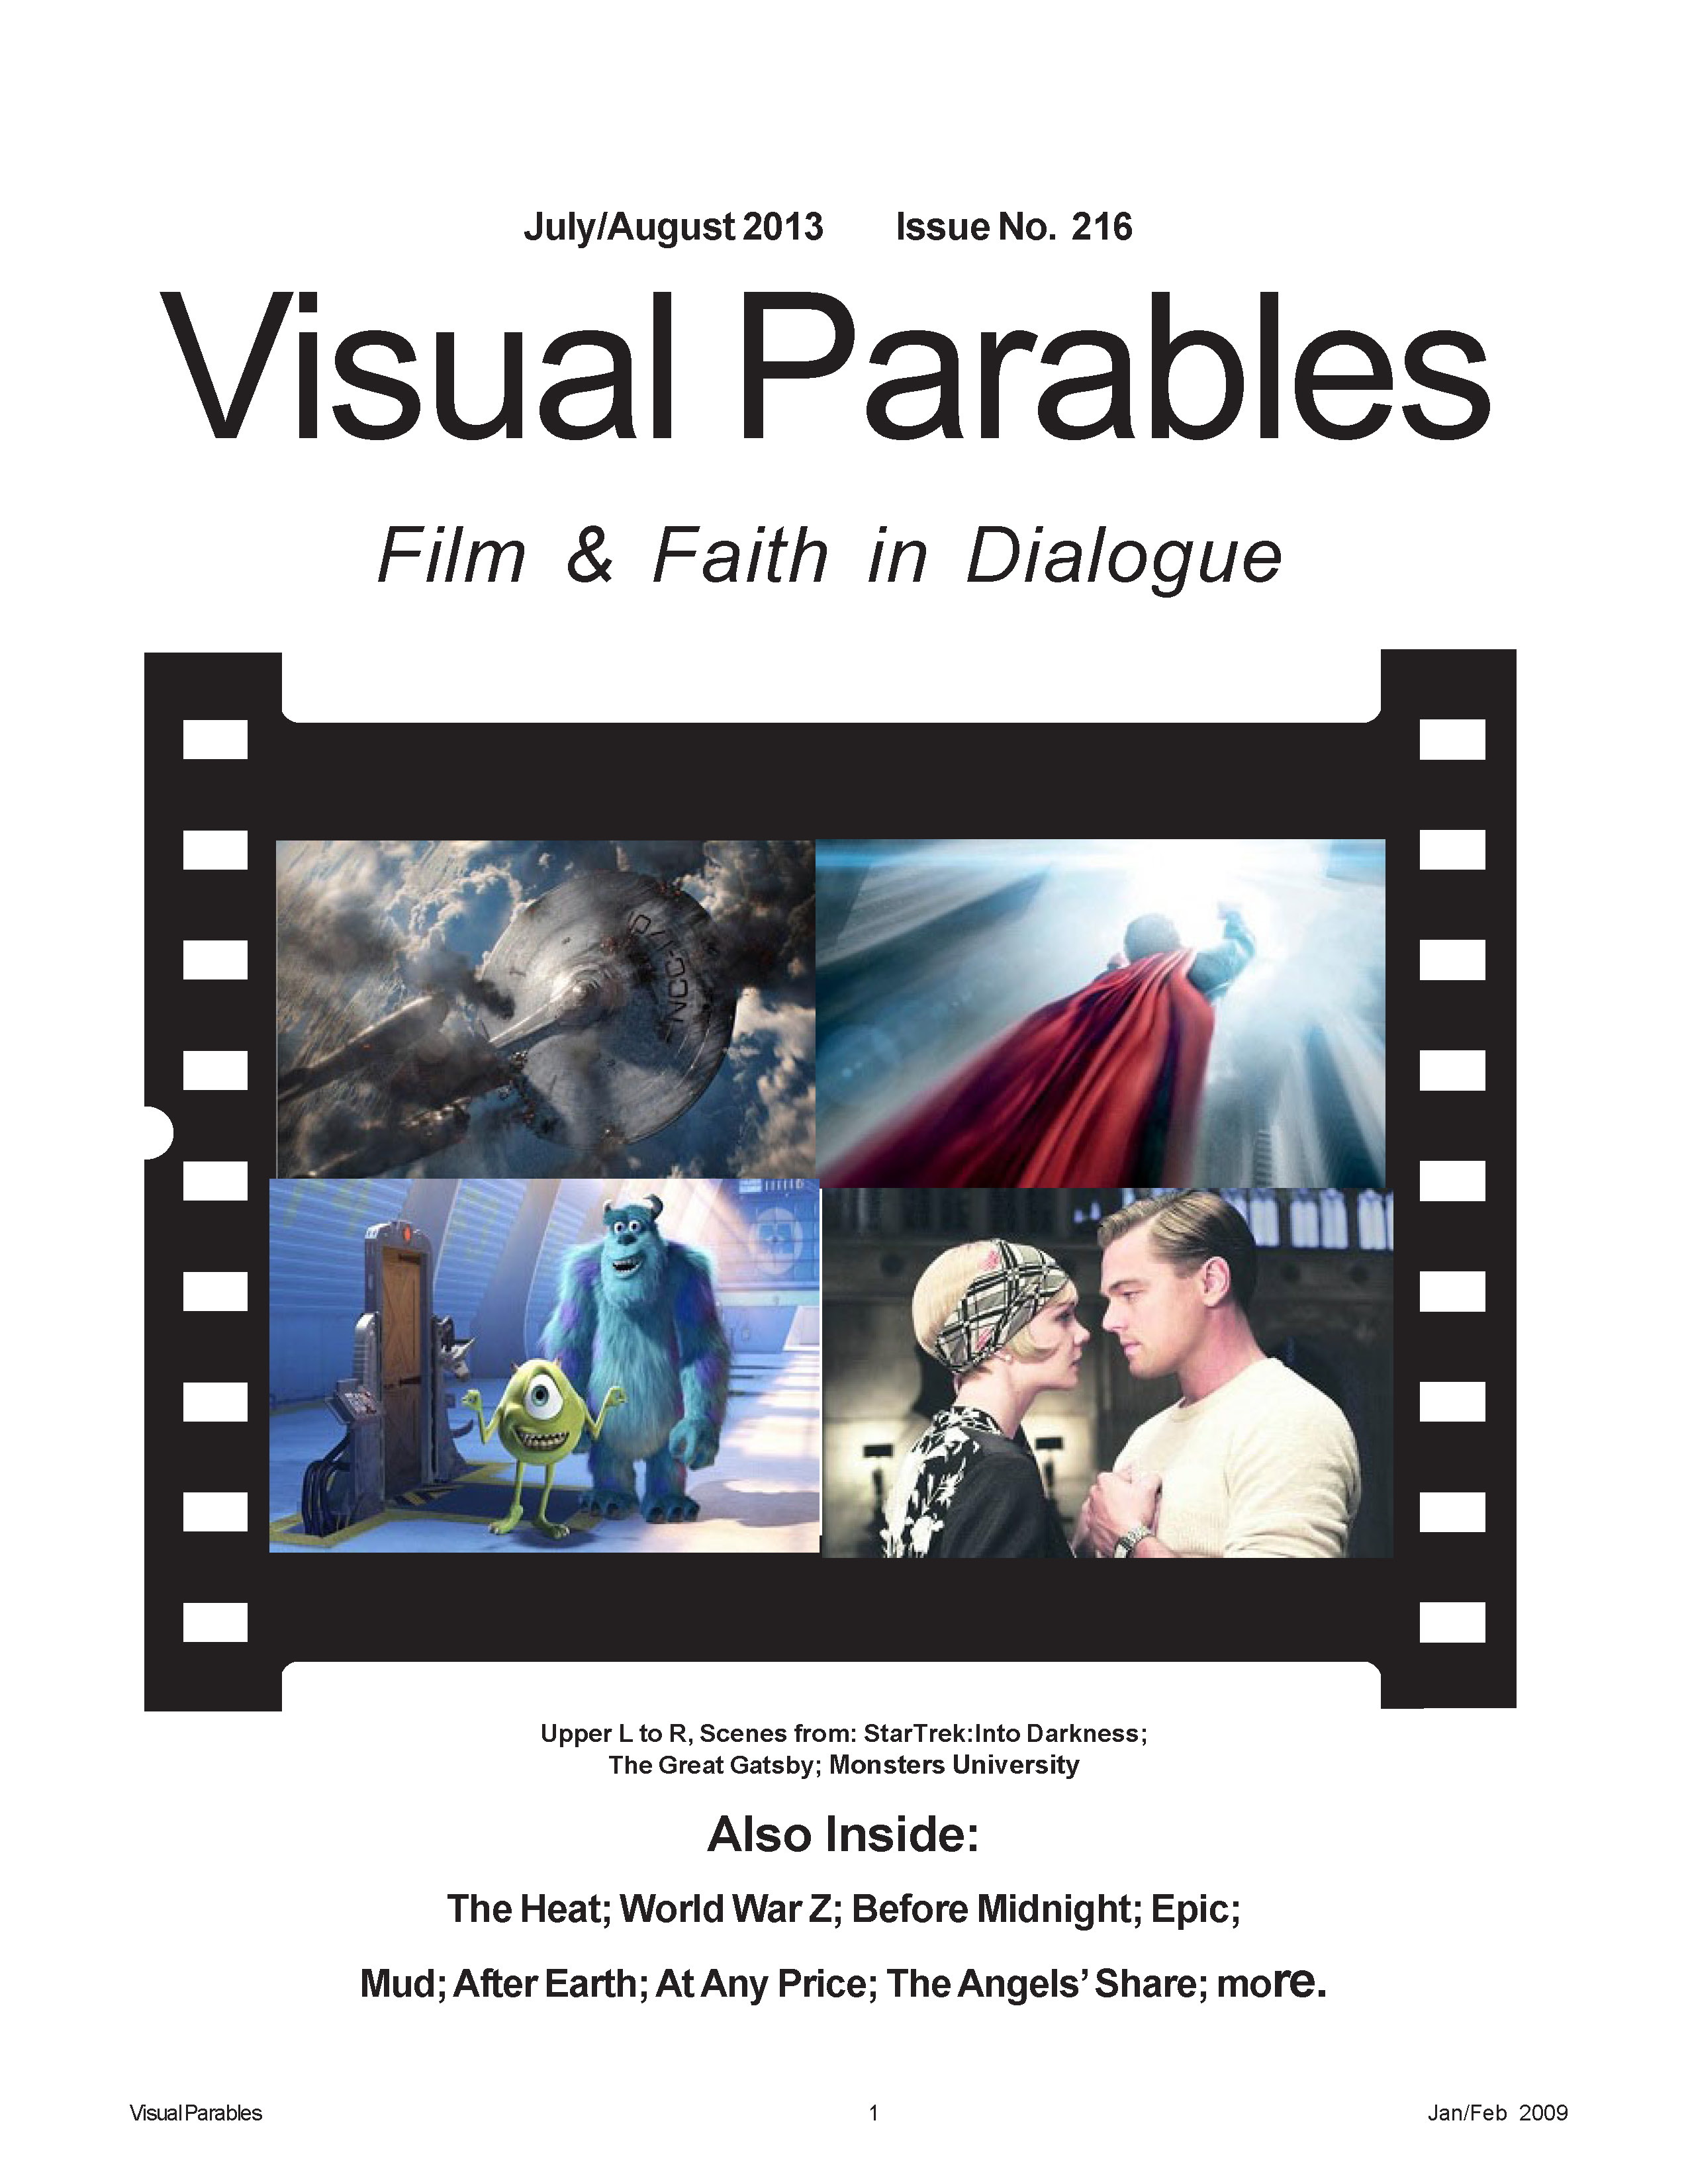 July / August 2013 issue of Visual Parables